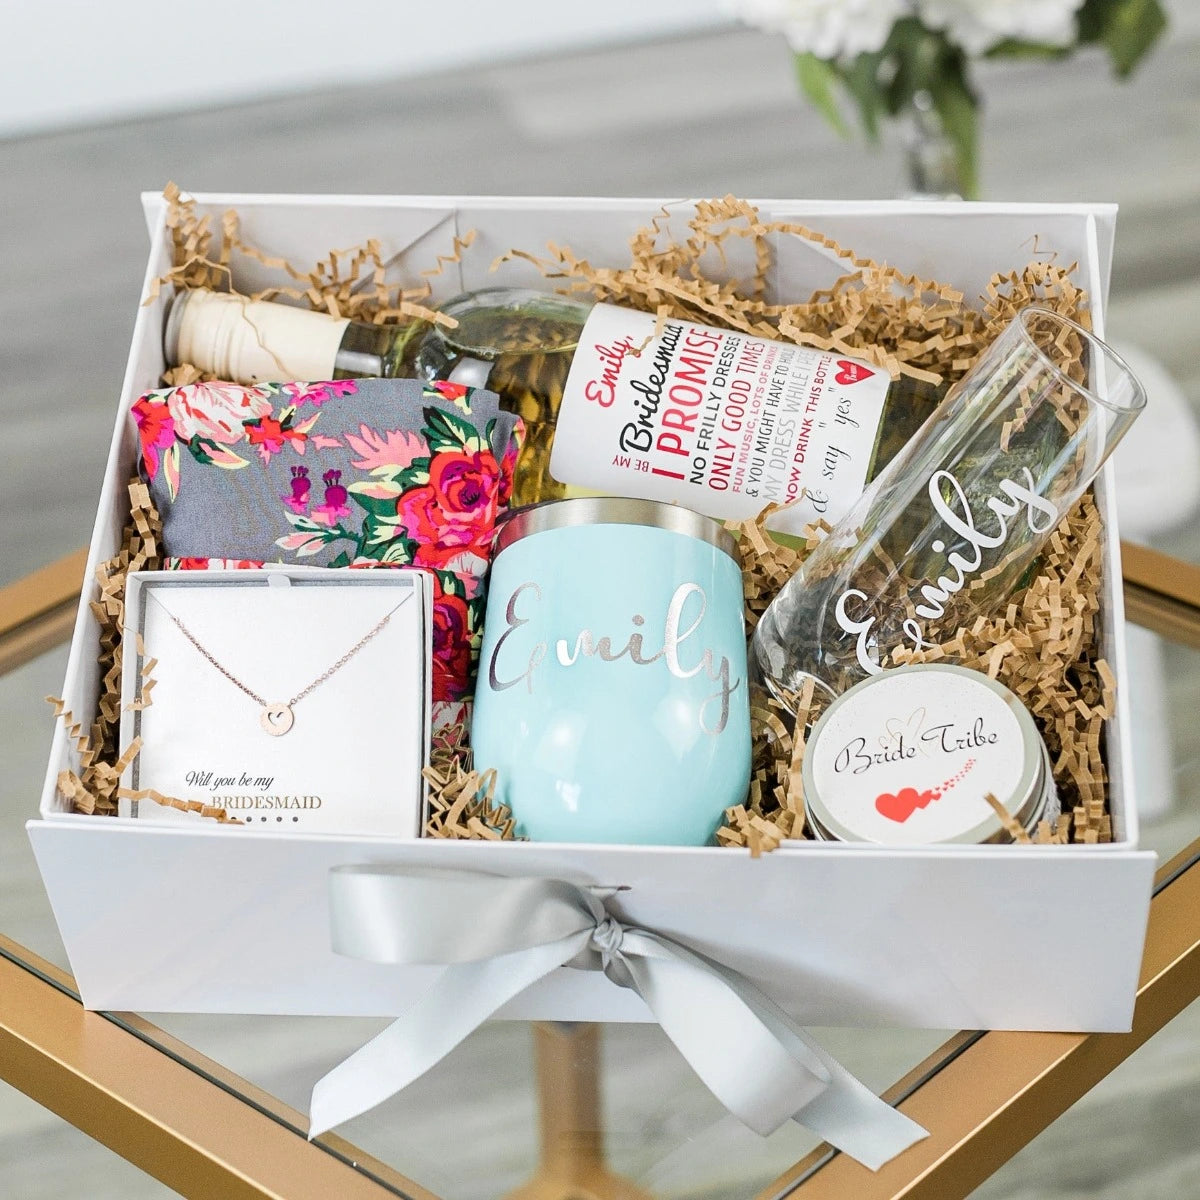 Emily Lucin hosted an extravagant bridesmaid proposal party